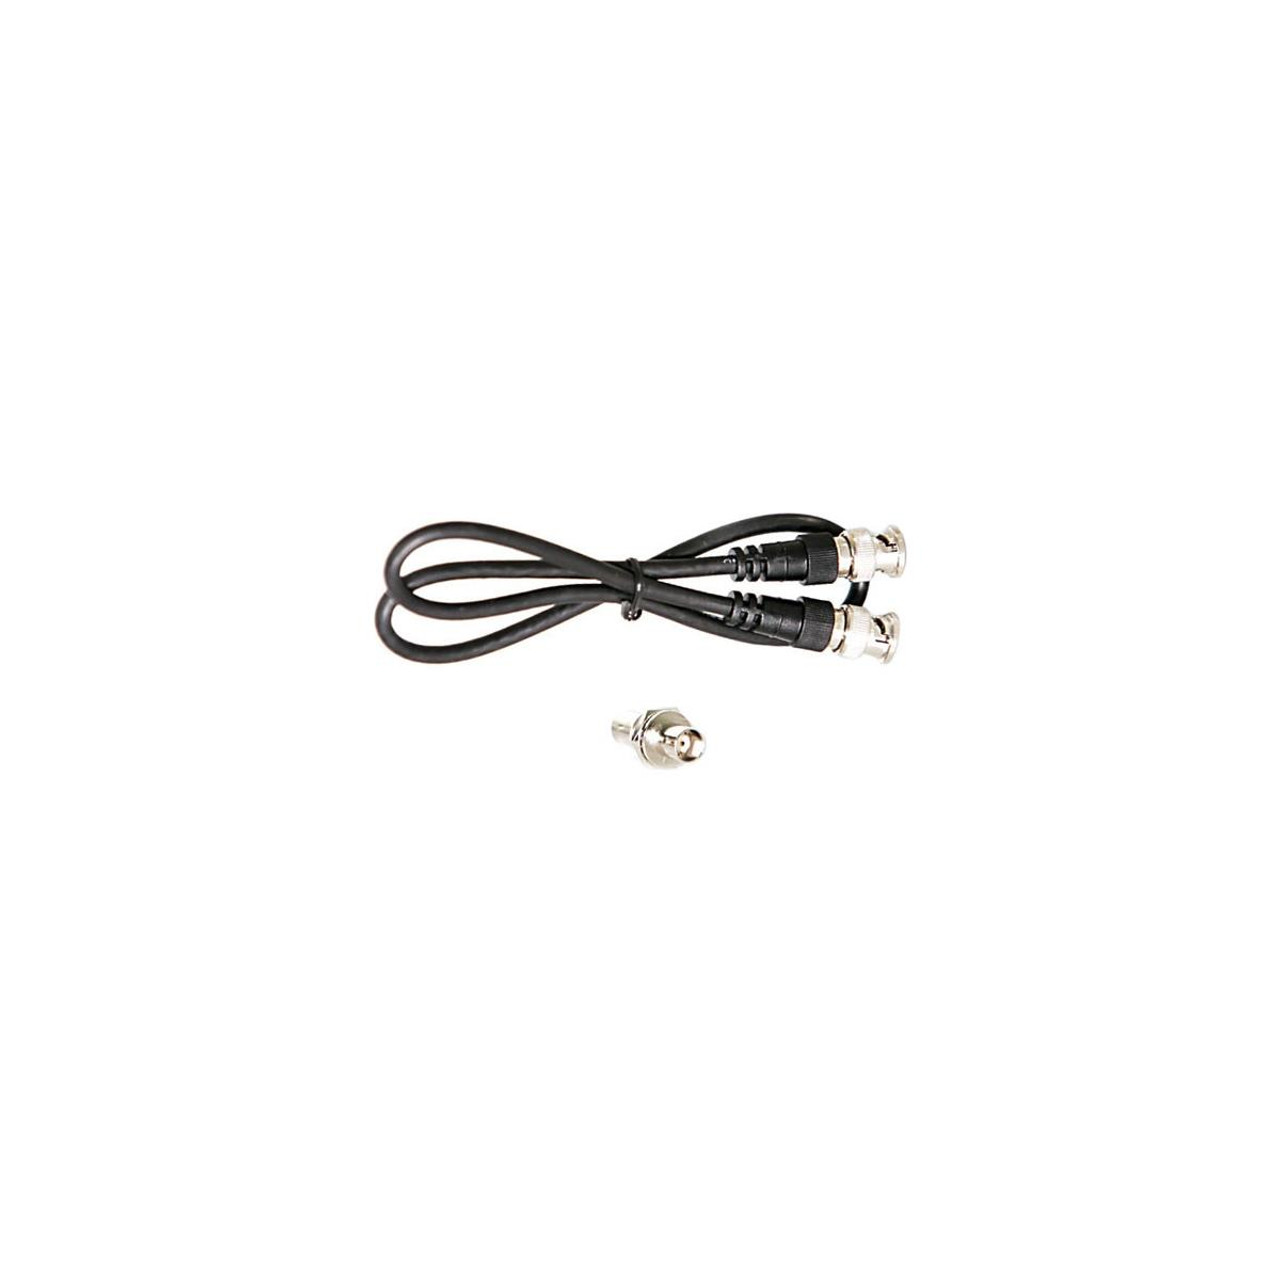 Audix CBLBNC25 25' 75Ohms Coaxial Cable With BNC Connectors For RAD360 Wireless Receiver Antenna